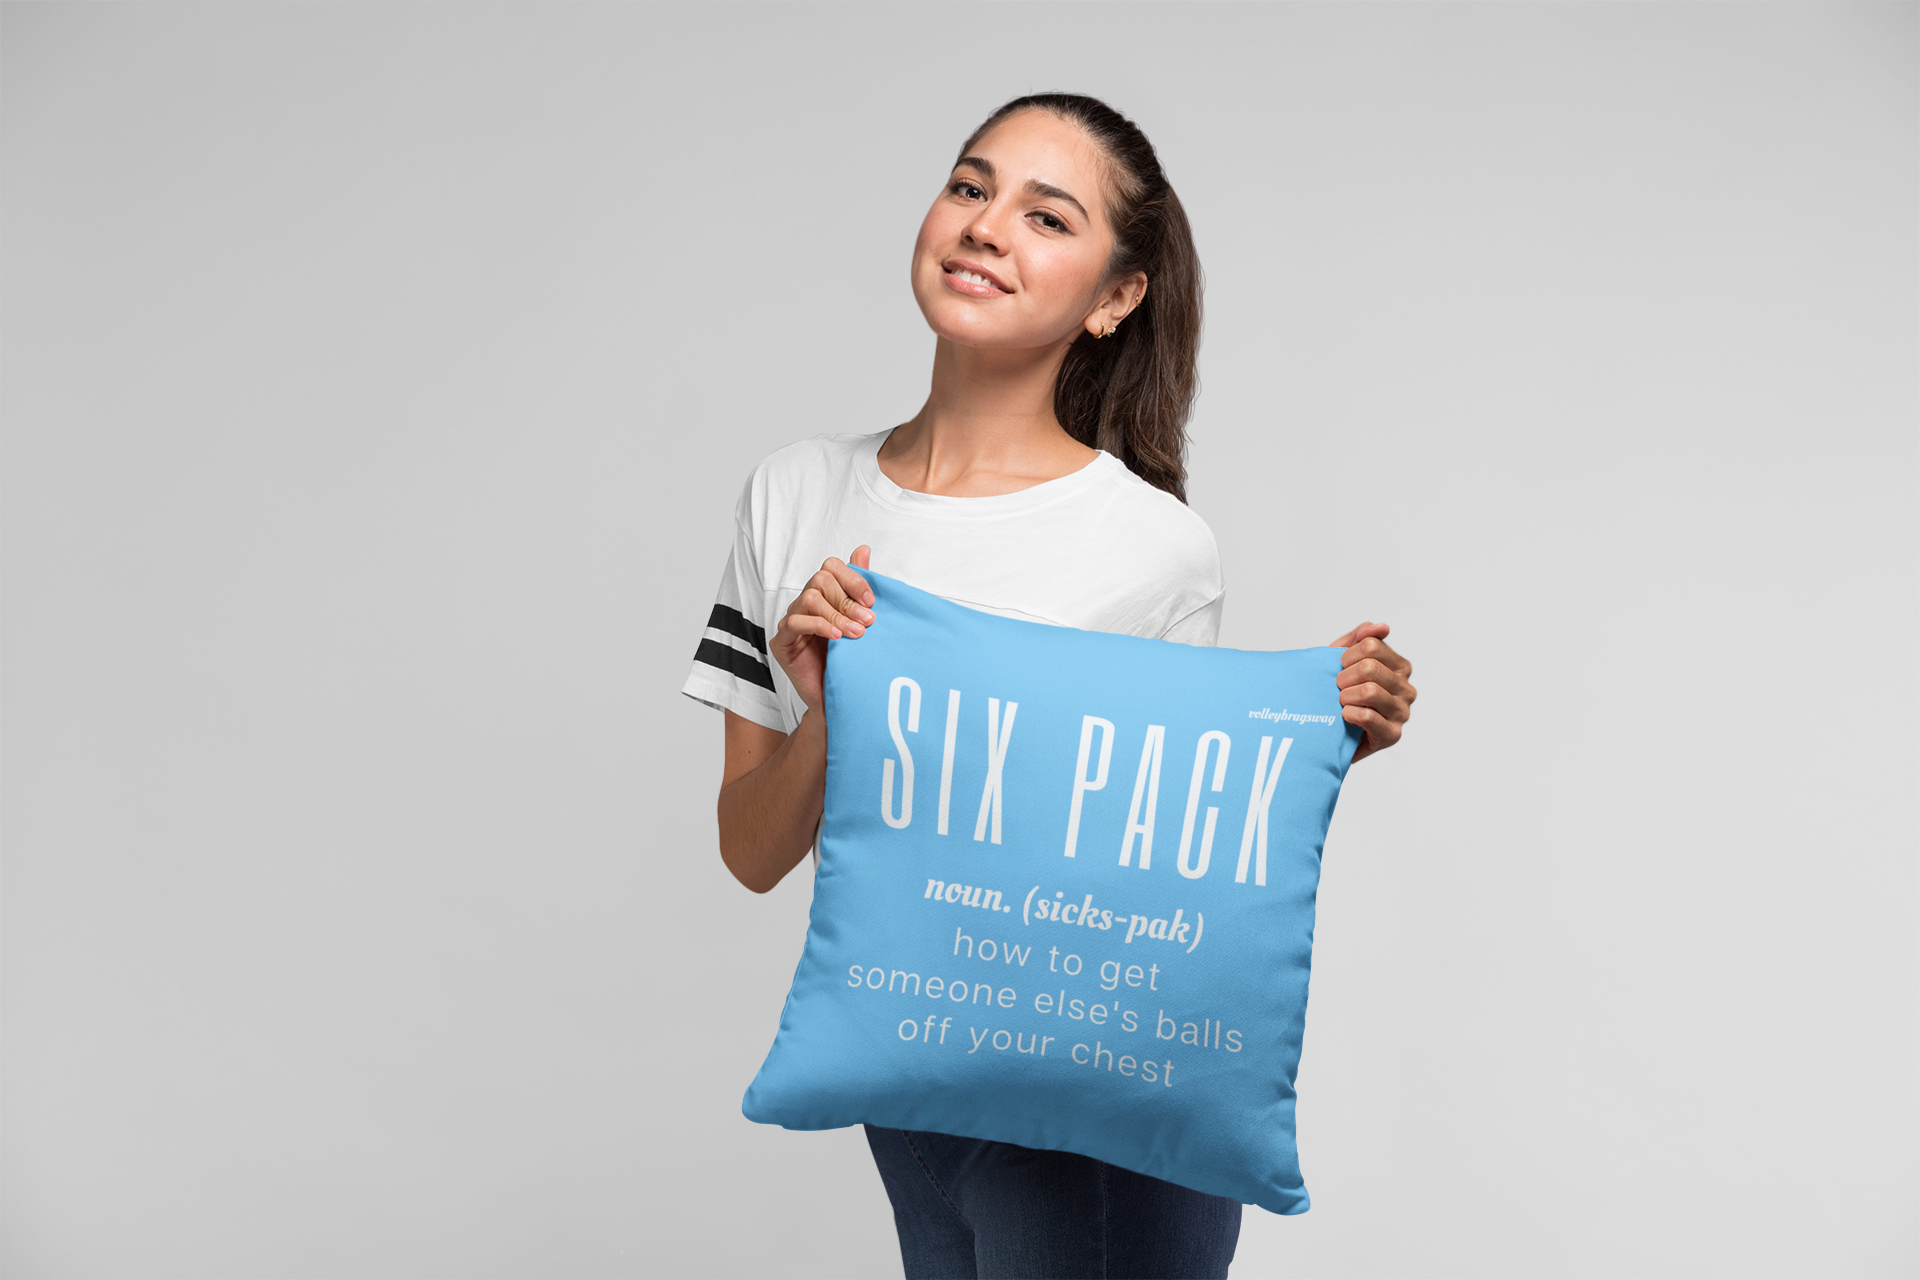 Sixpack (noun) How to Get Someone else's  Balls Off Your Chest volleyball pillow. April Chapple, Launches a Hilarious Volleyball Pillow Line With Fun Tongue-in-Cheek Designs sure to make players laugh.